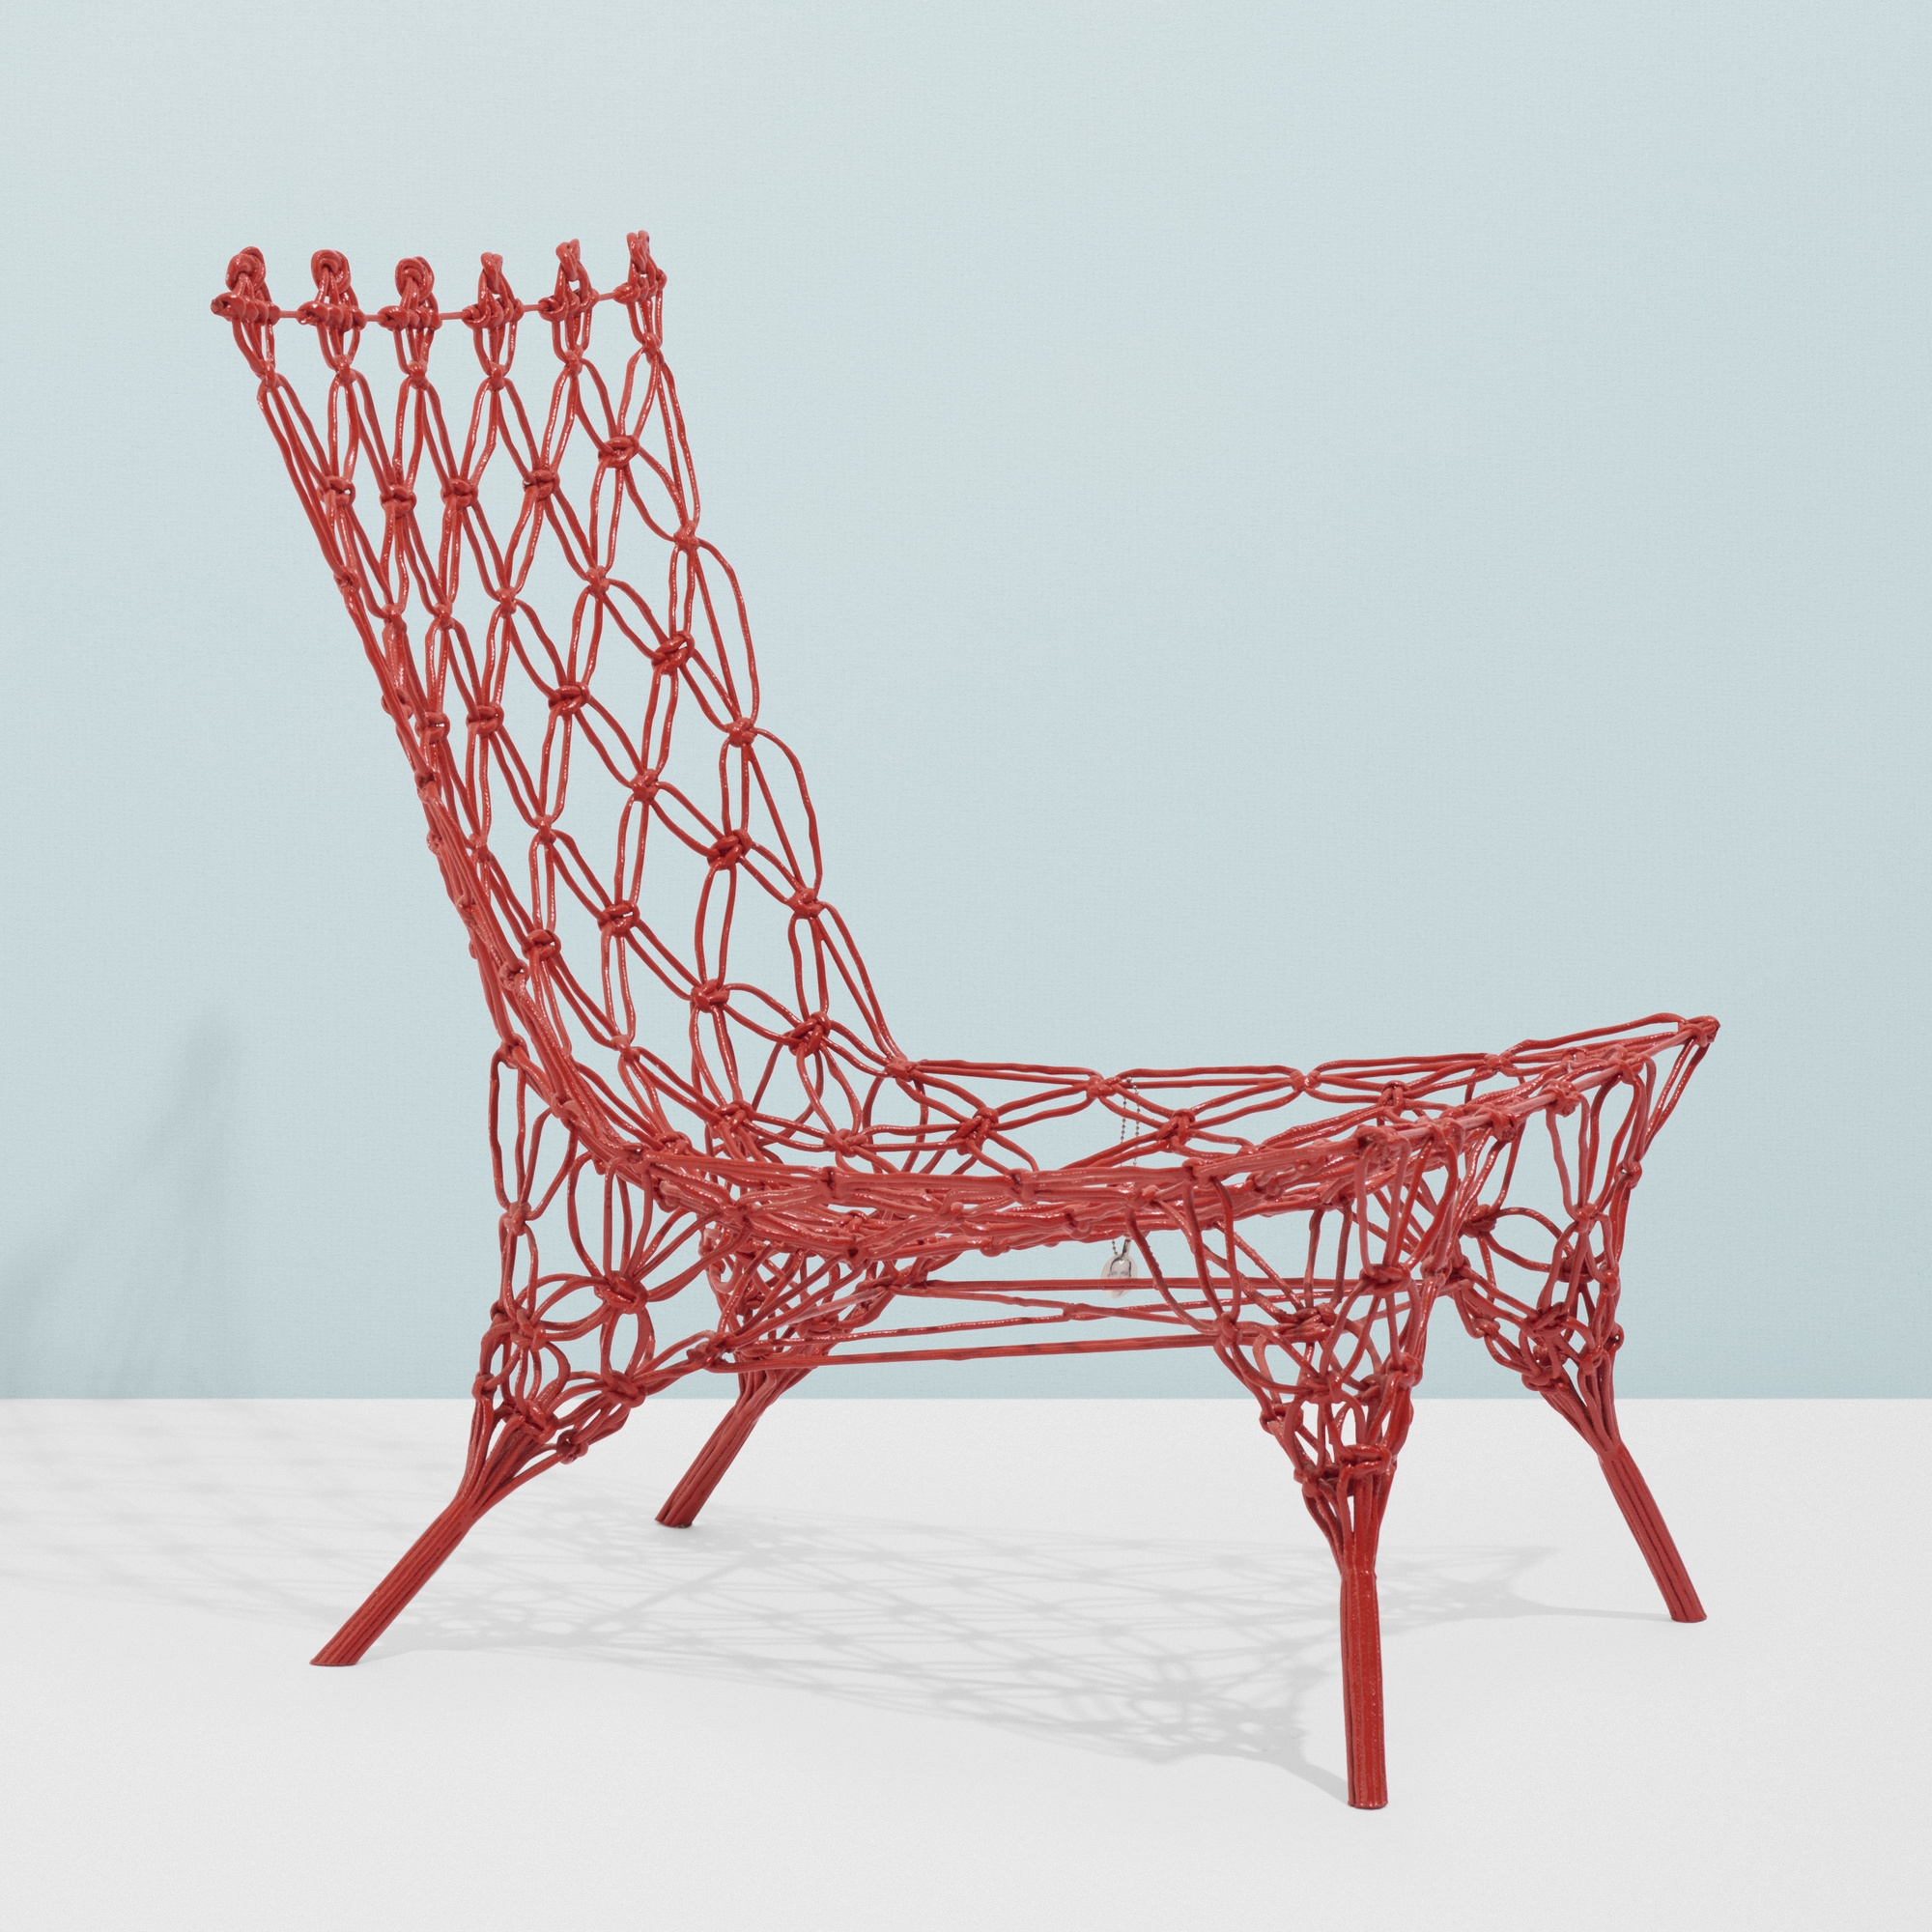 Marcel Wanders - Limited Edition Rouge Knotted Chair by Marcel